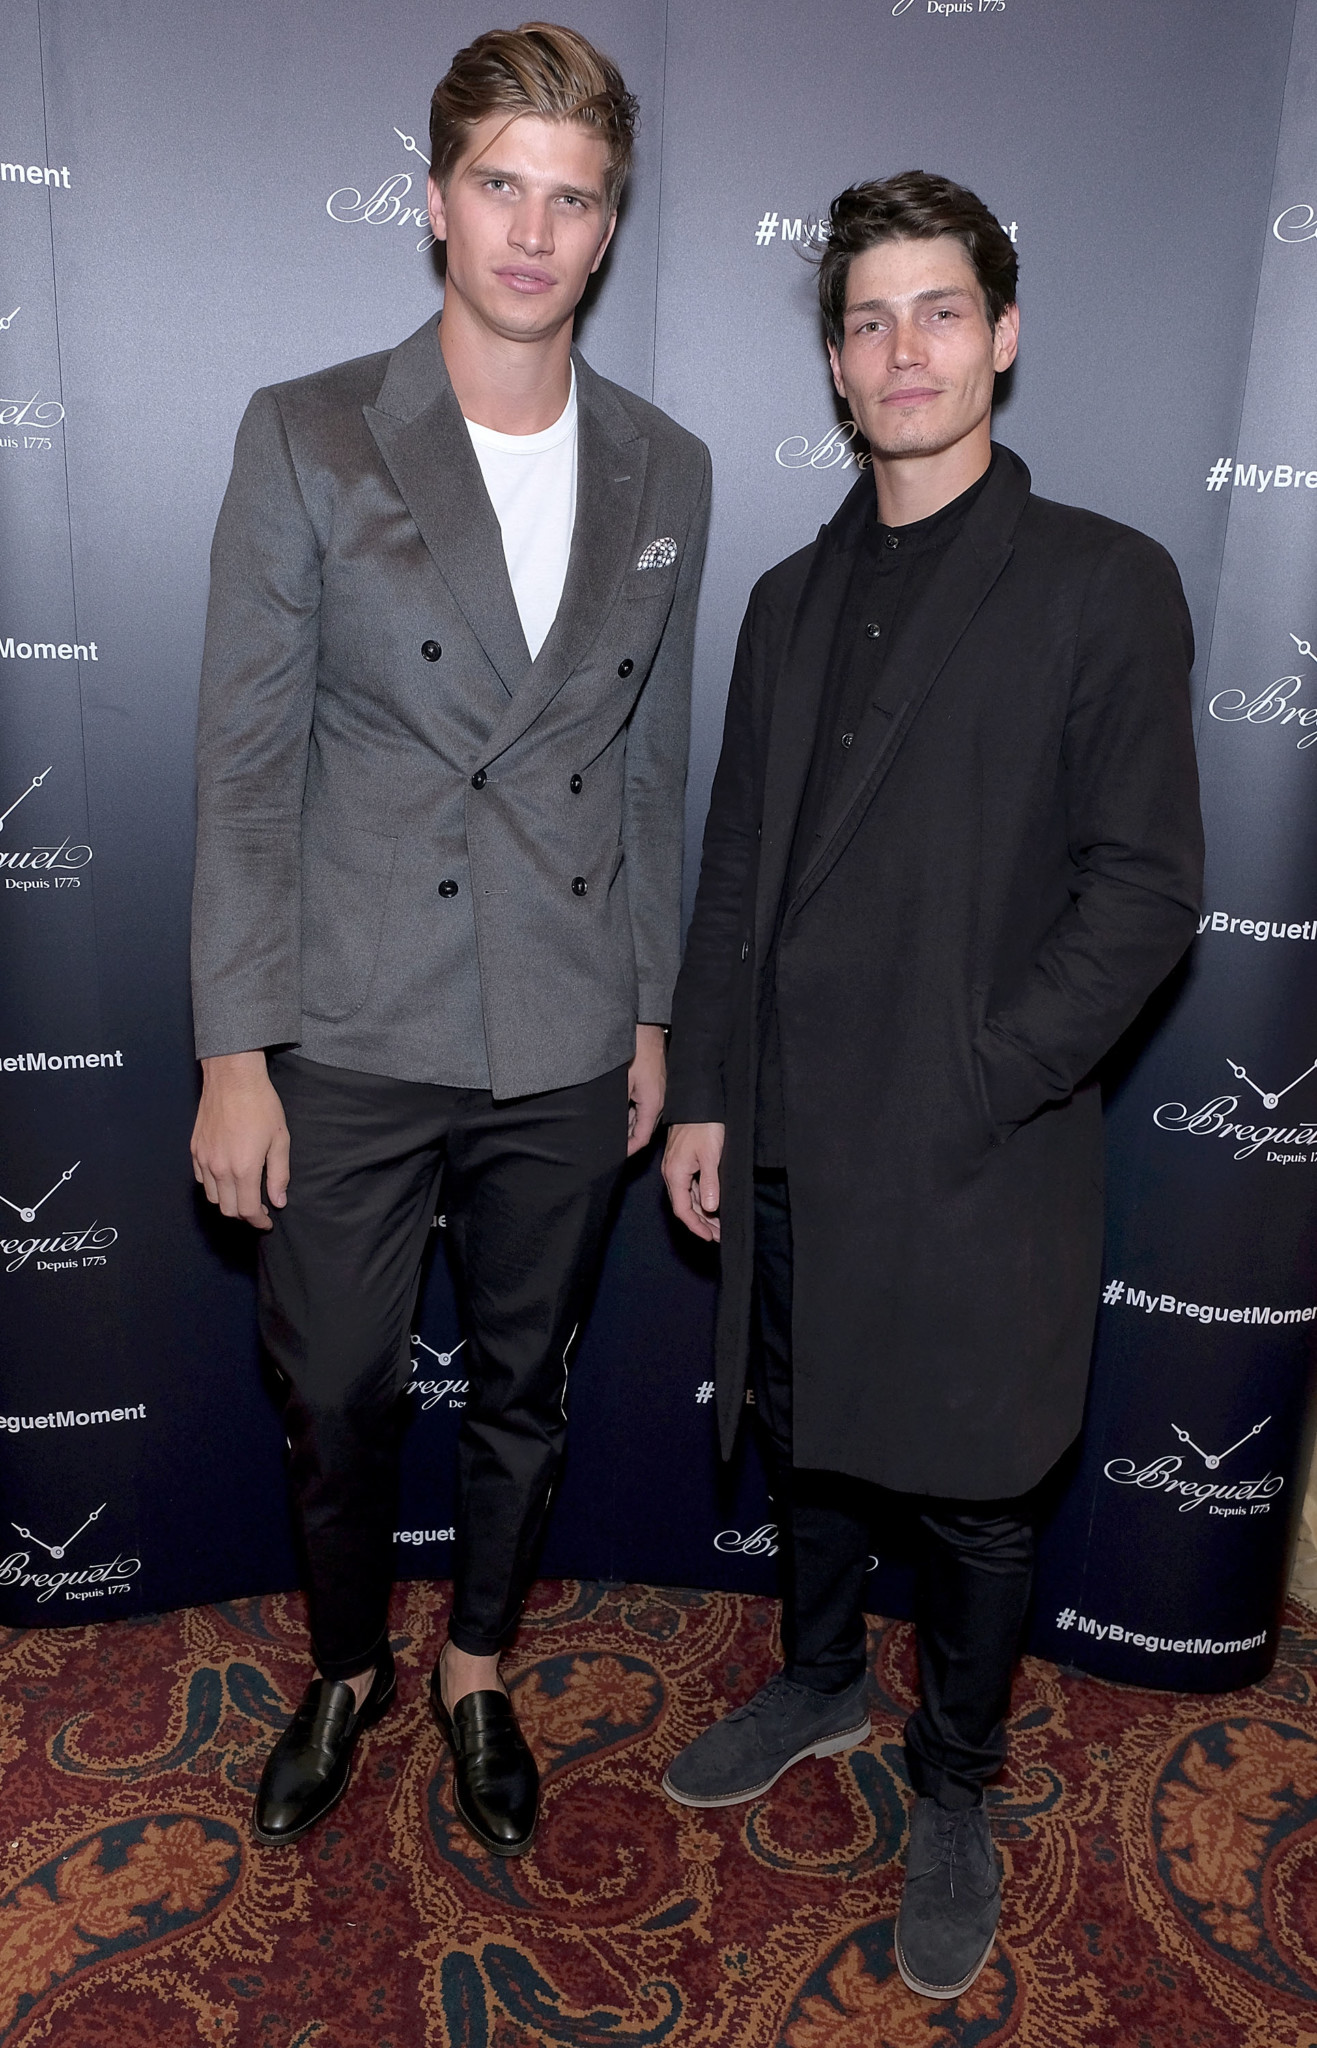 London, england - october 04: toby huntington-whiteley and sam way attend the breguet classic tour #mybreguetmoment in association with the gentleman's journal at mark's club on october 4, 2017 in london, england. (photo by david m. Benett/dave benett/getty images for breguet) *** local caption *** toby huntington-whiteley; sam way